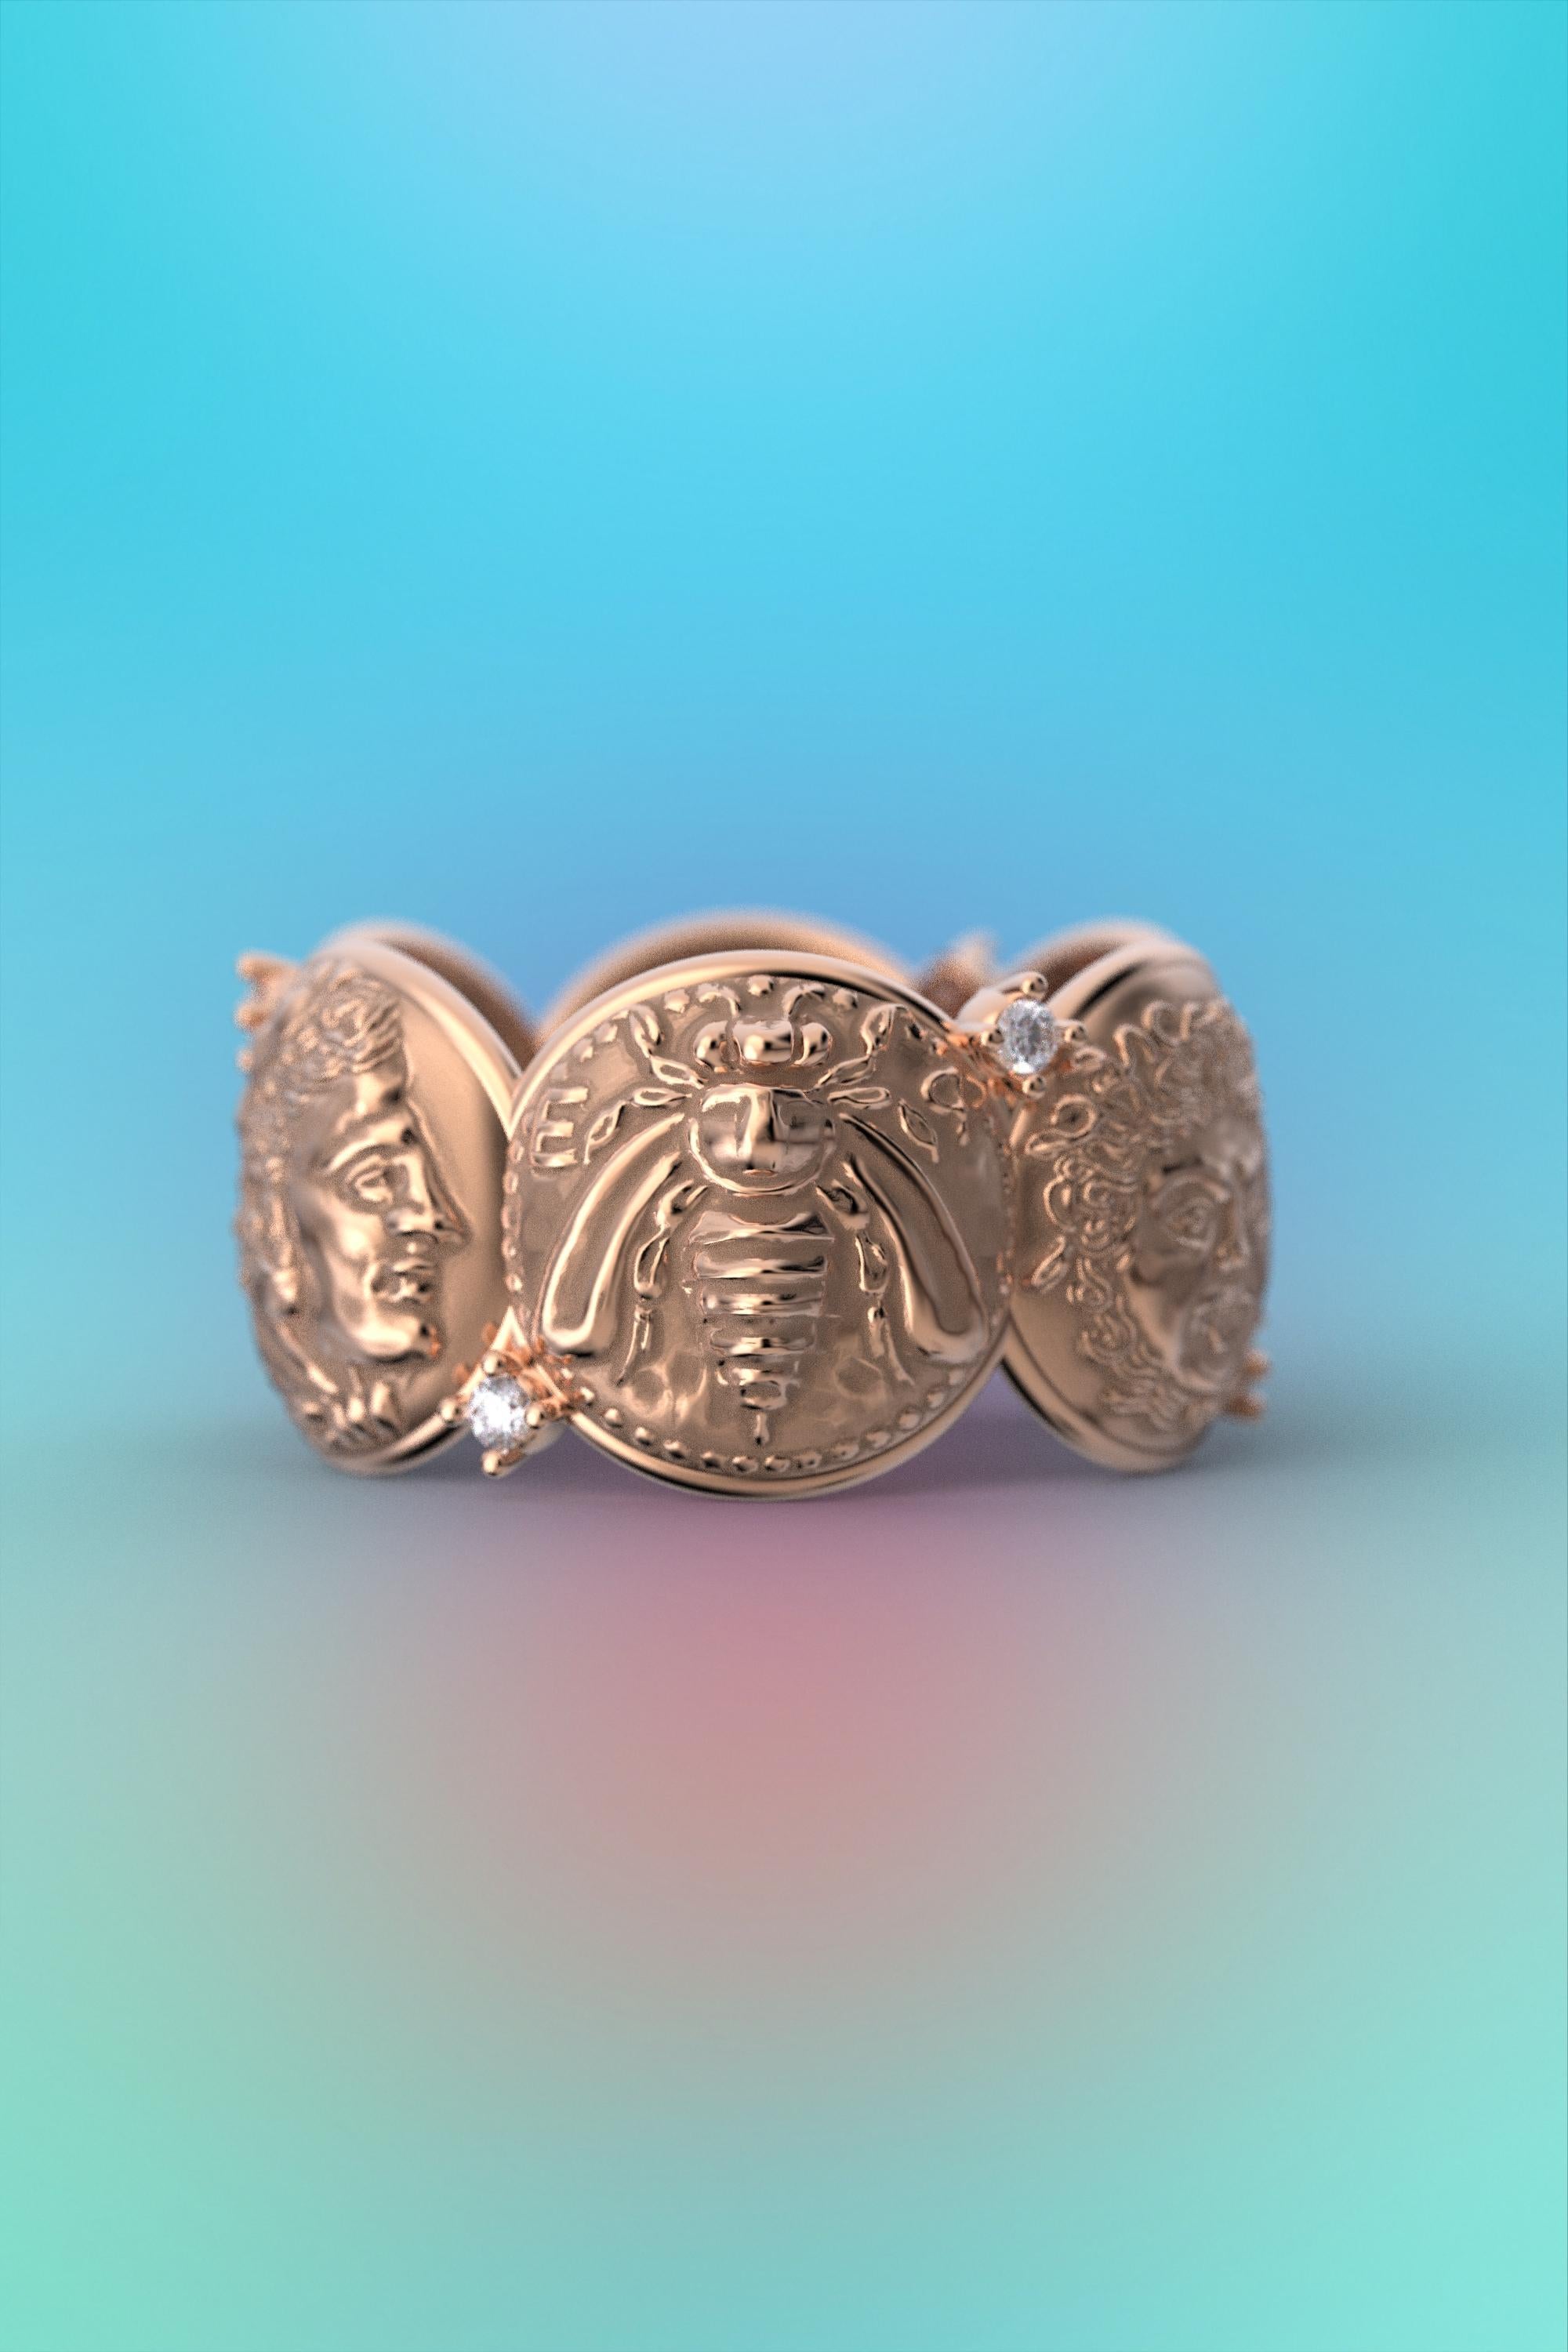 For Sale:  18k Antique Style Gold Ring with Antique Coin Reproductions and Natural Diamonds 5